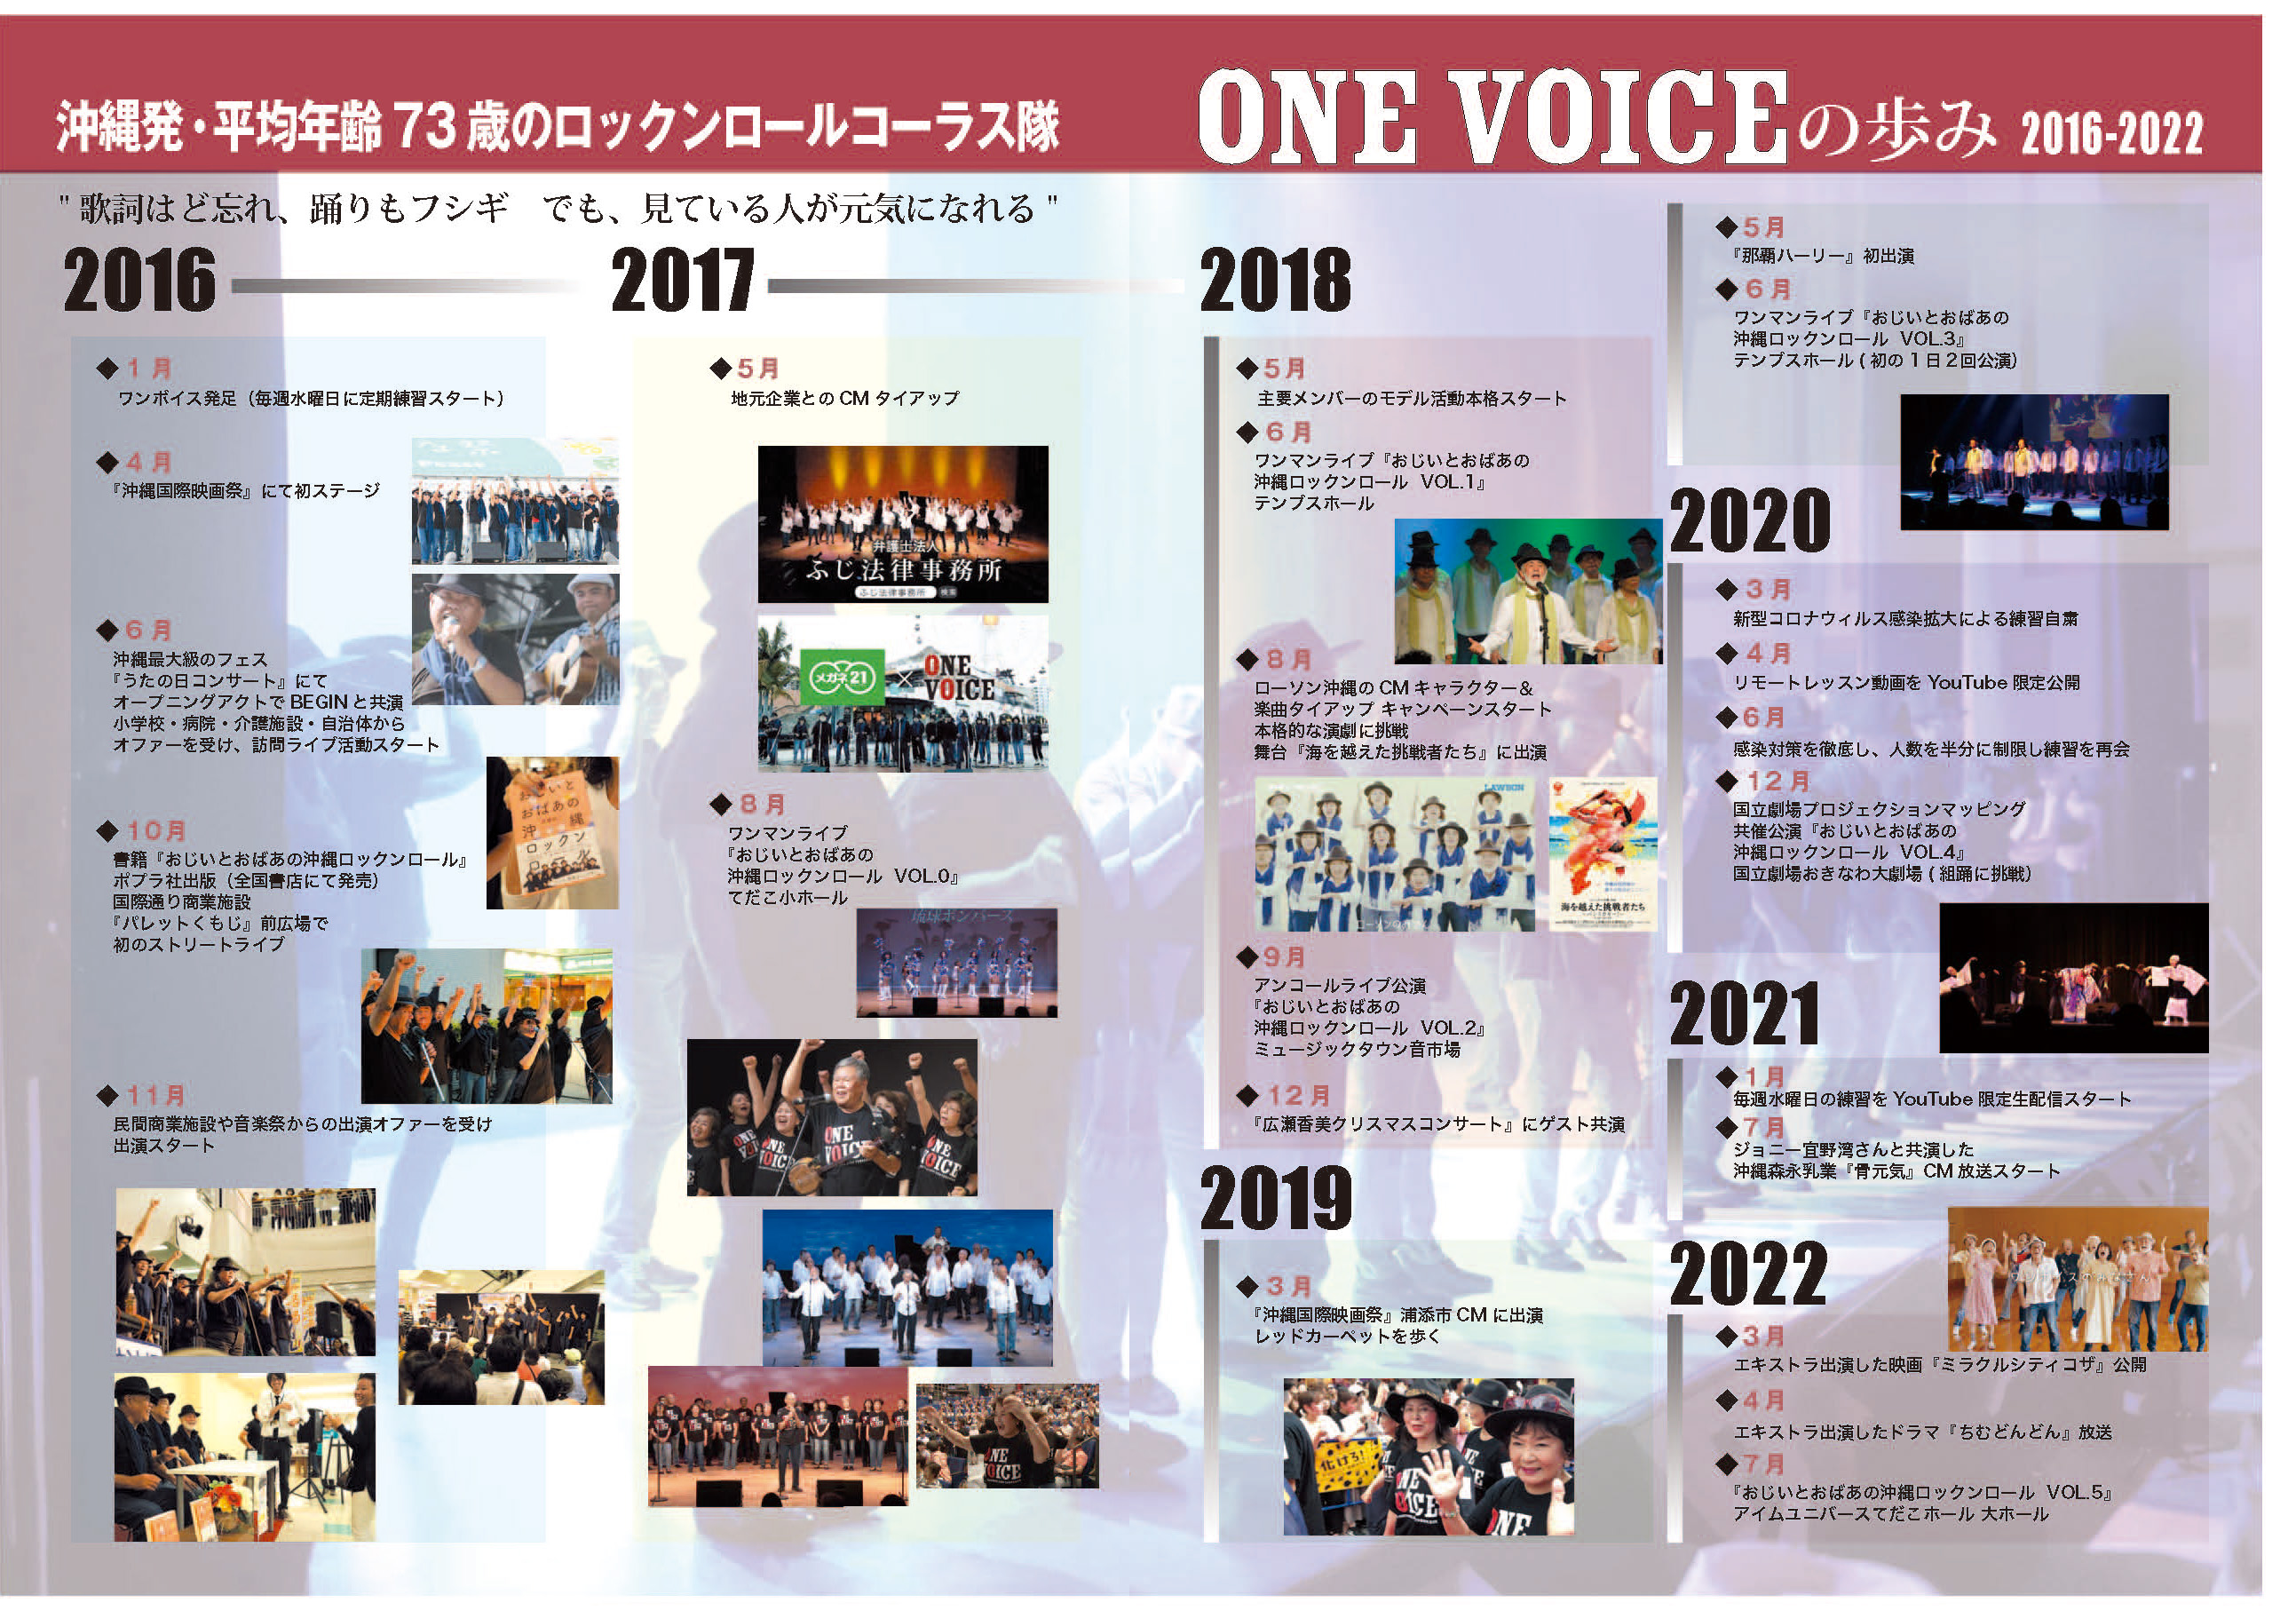 OneVoice history2016-2019